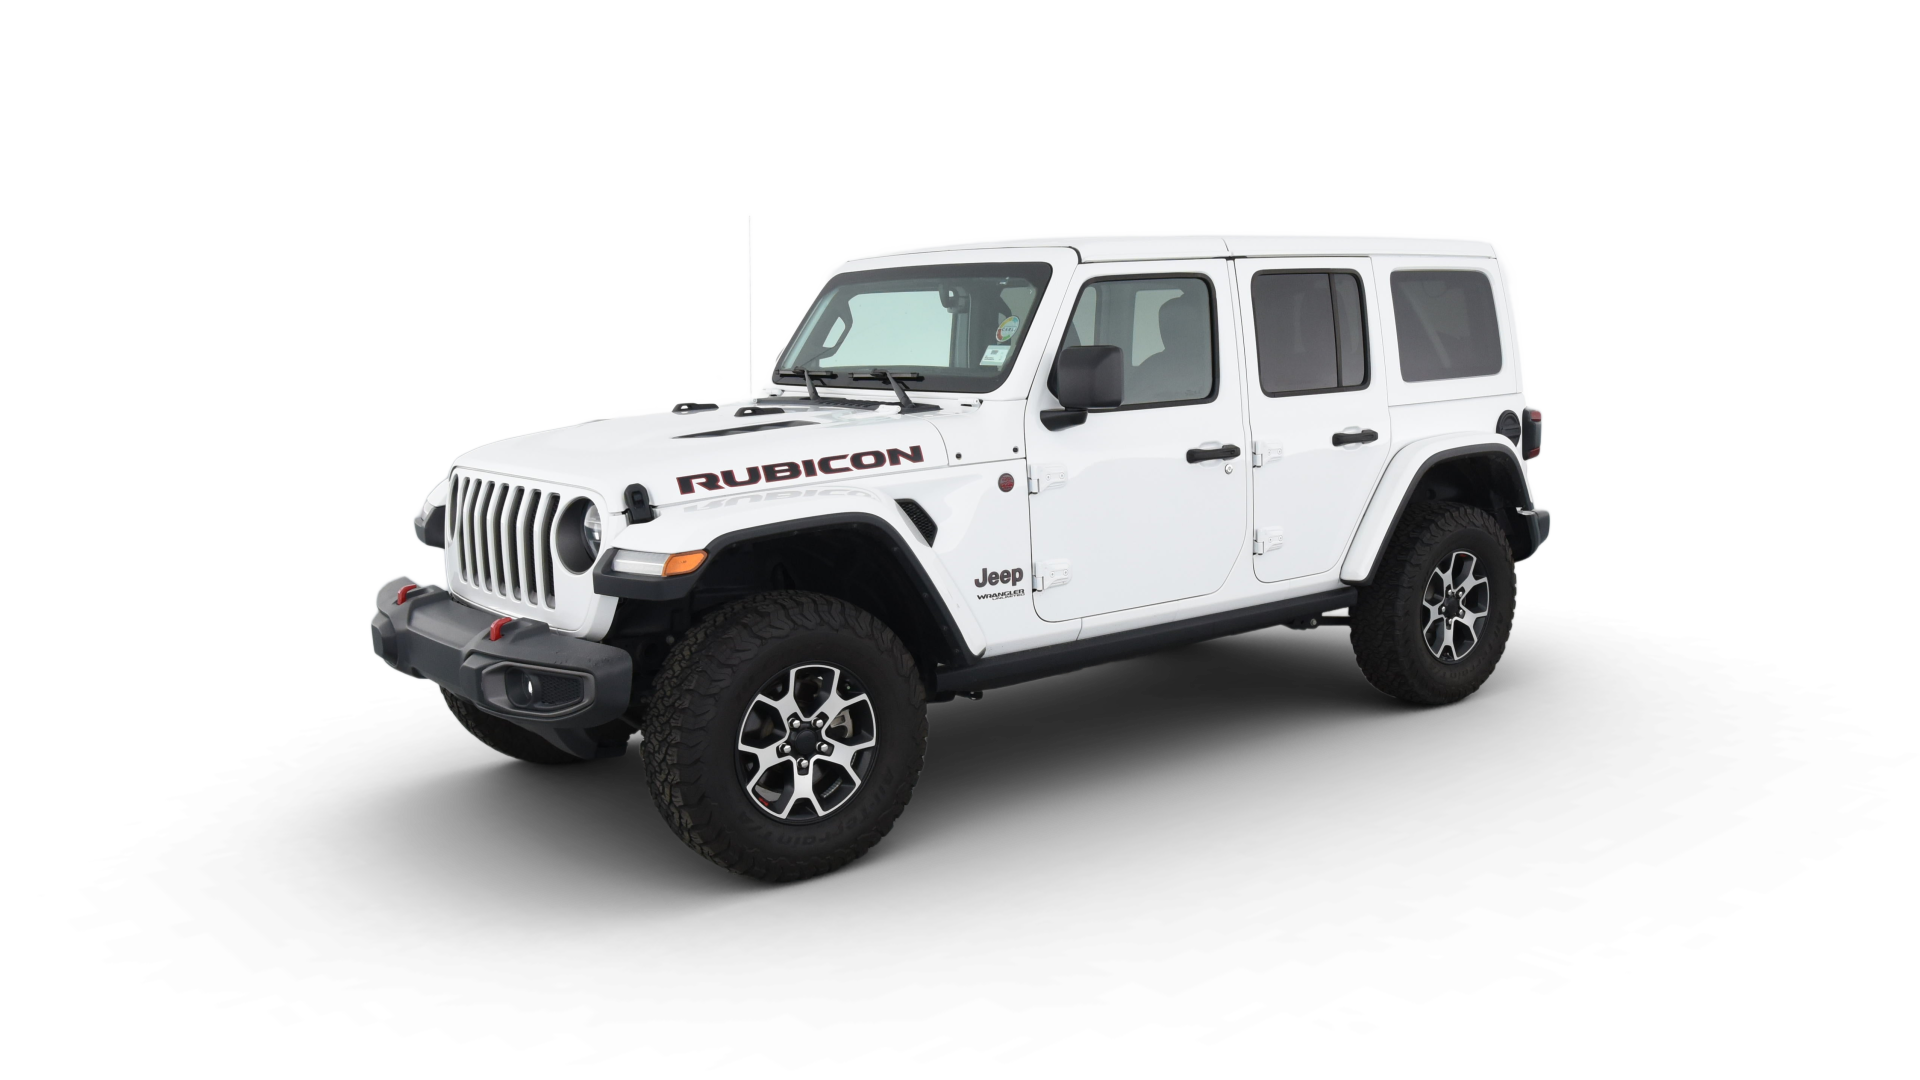 Used White Jeep Rubicon For Sale Online | Carvana